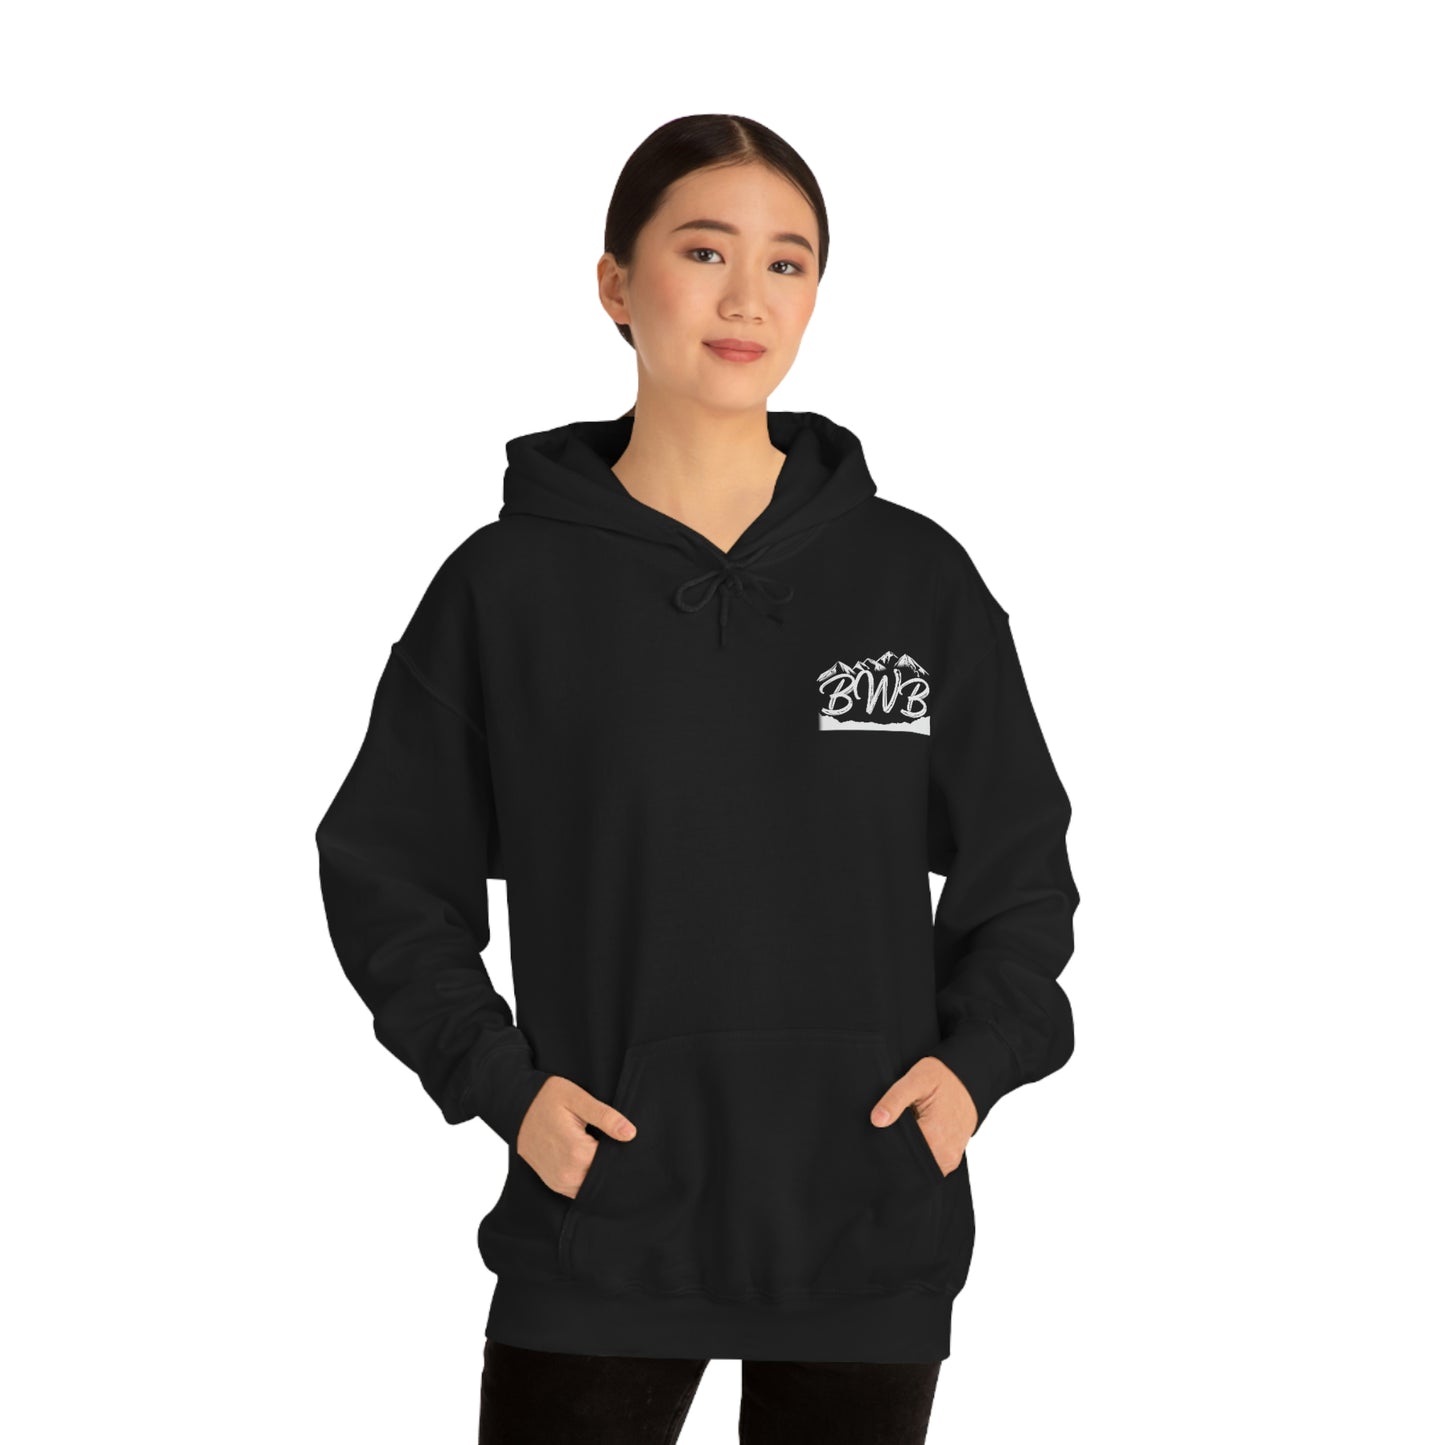 Support and Defend Hoodie - Backwoods Branding Co.